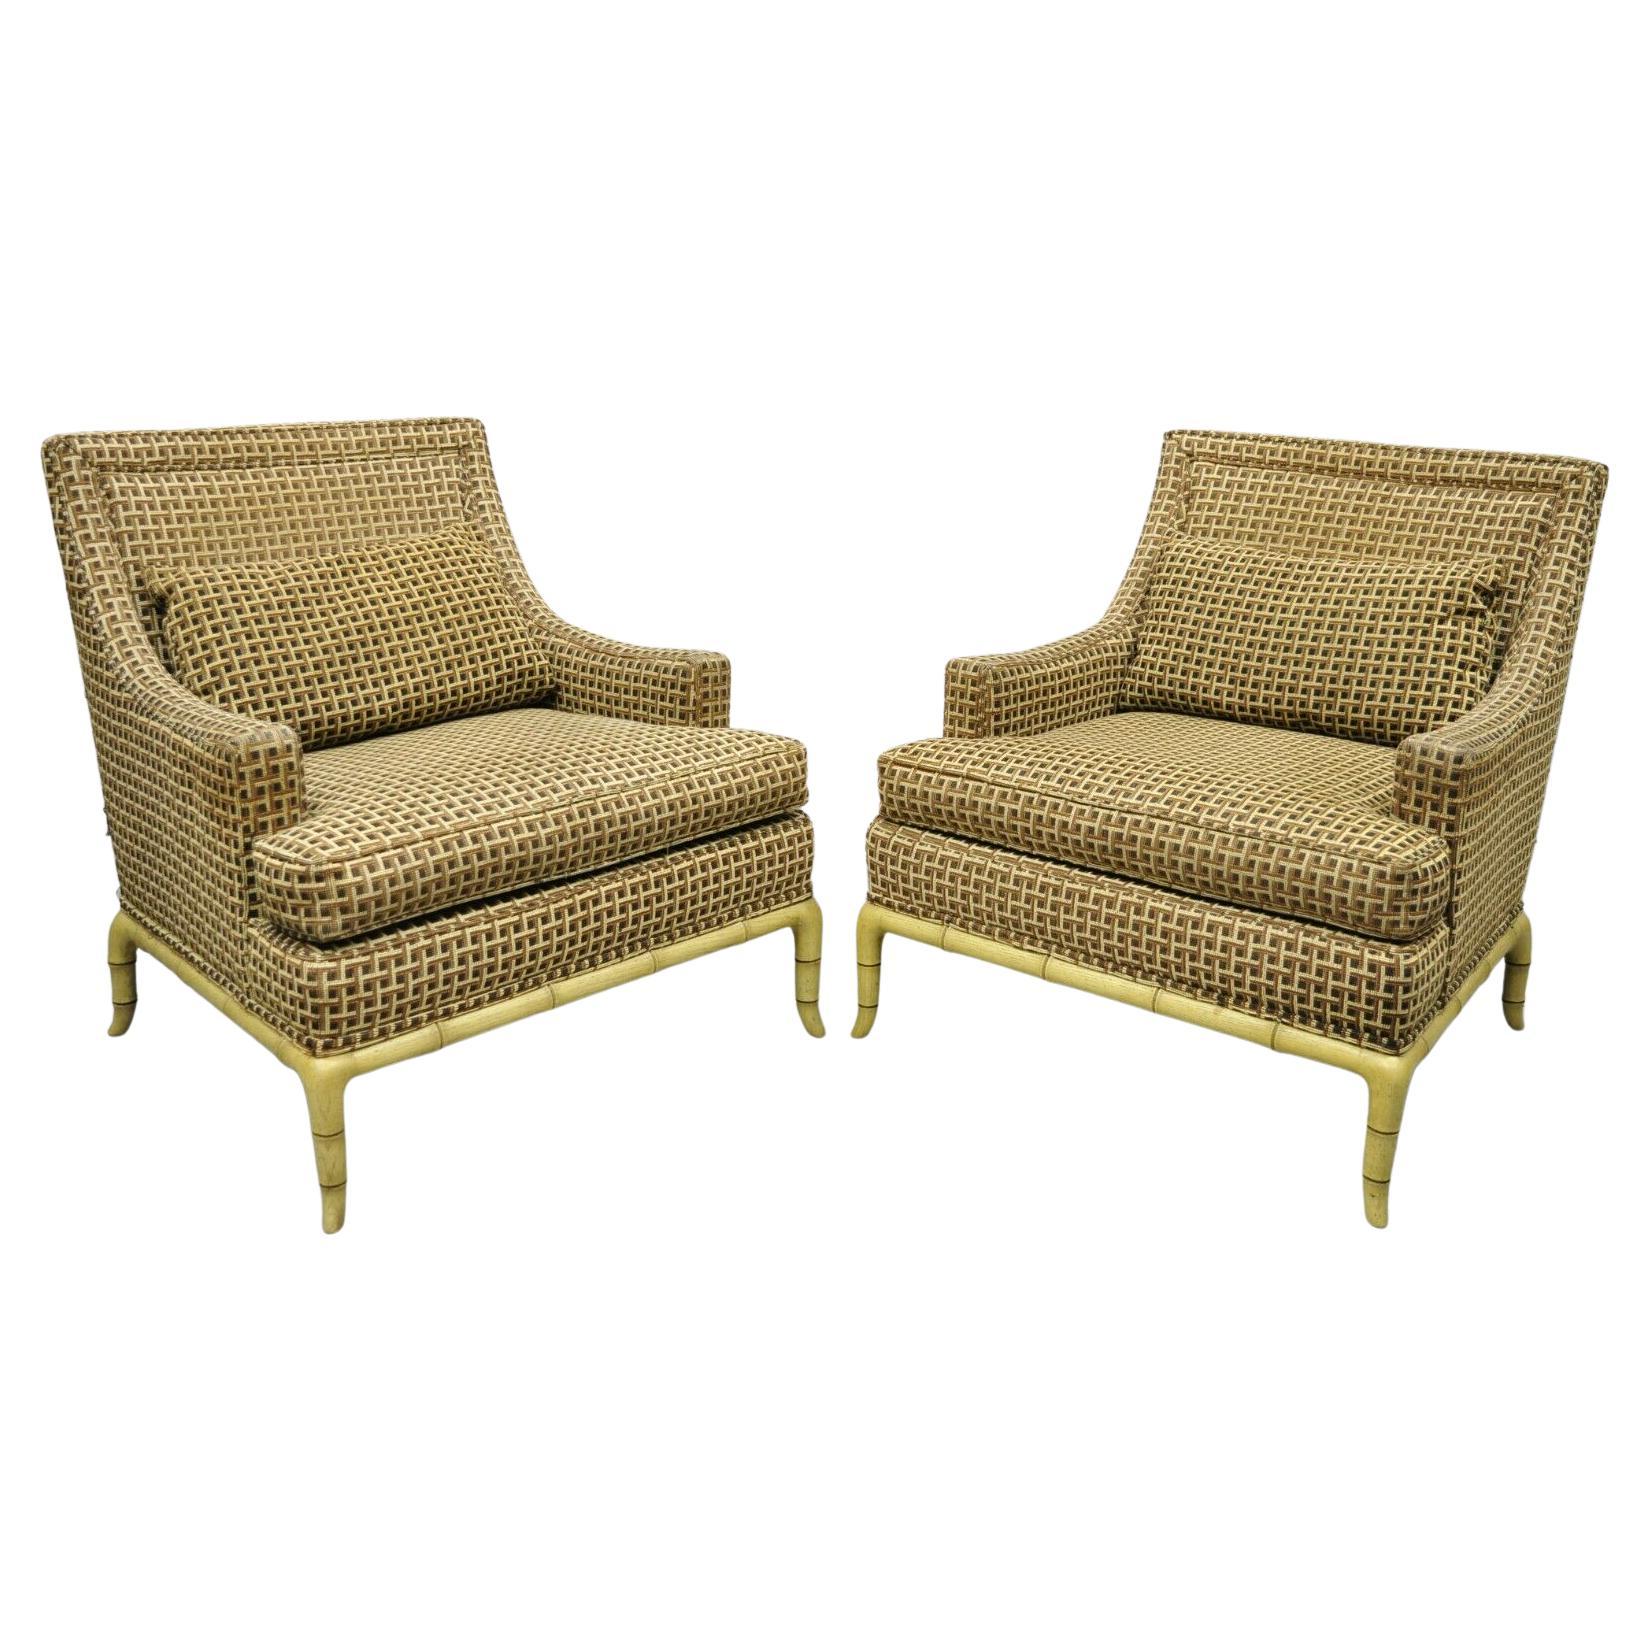 Marge Carson Vintage Faux Bamboo Hollywood Regency Lounge Club Chairs, a Pair